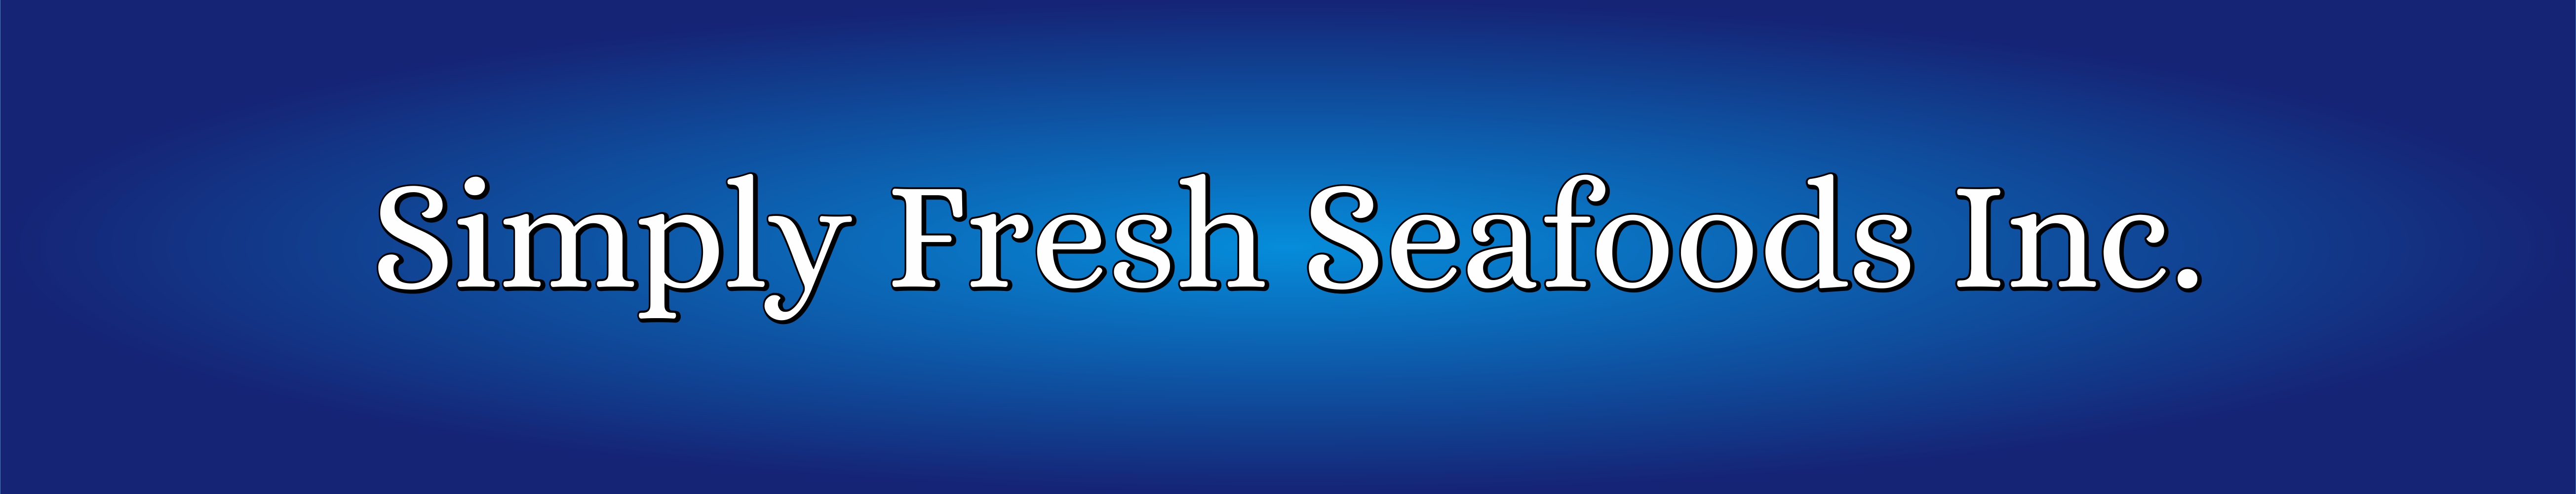 Simply Fresh Seafoods